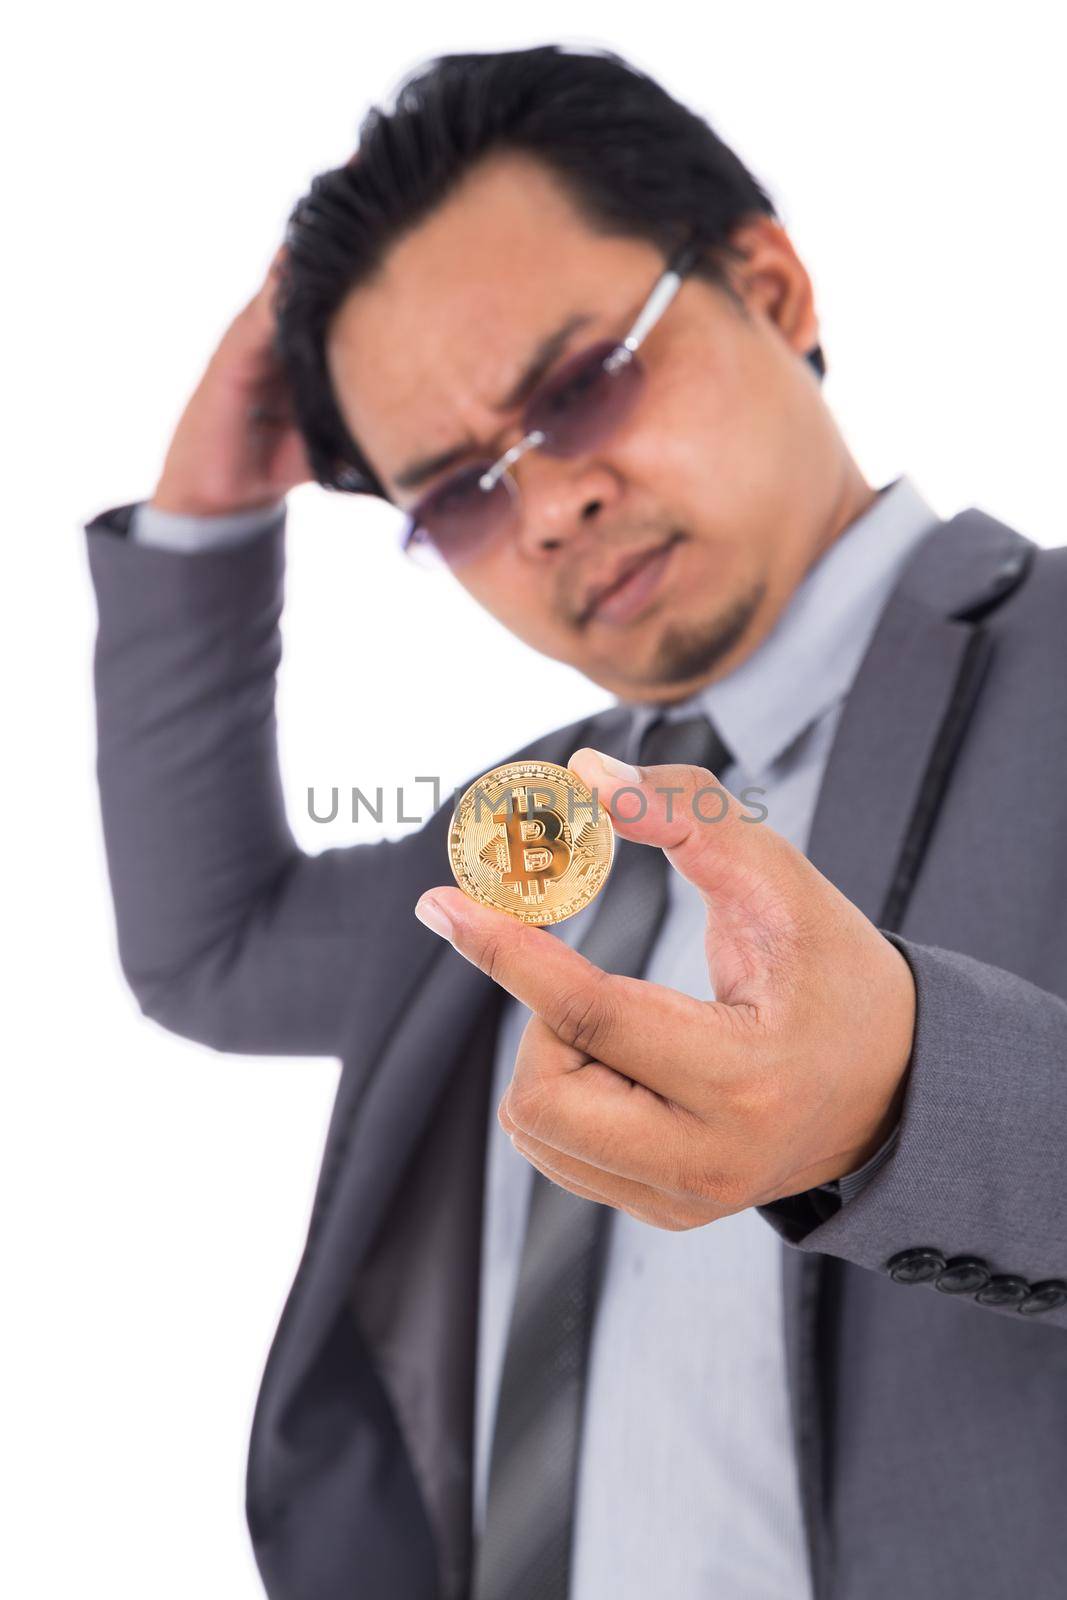 businessman sad about bitcoin isolated on white background